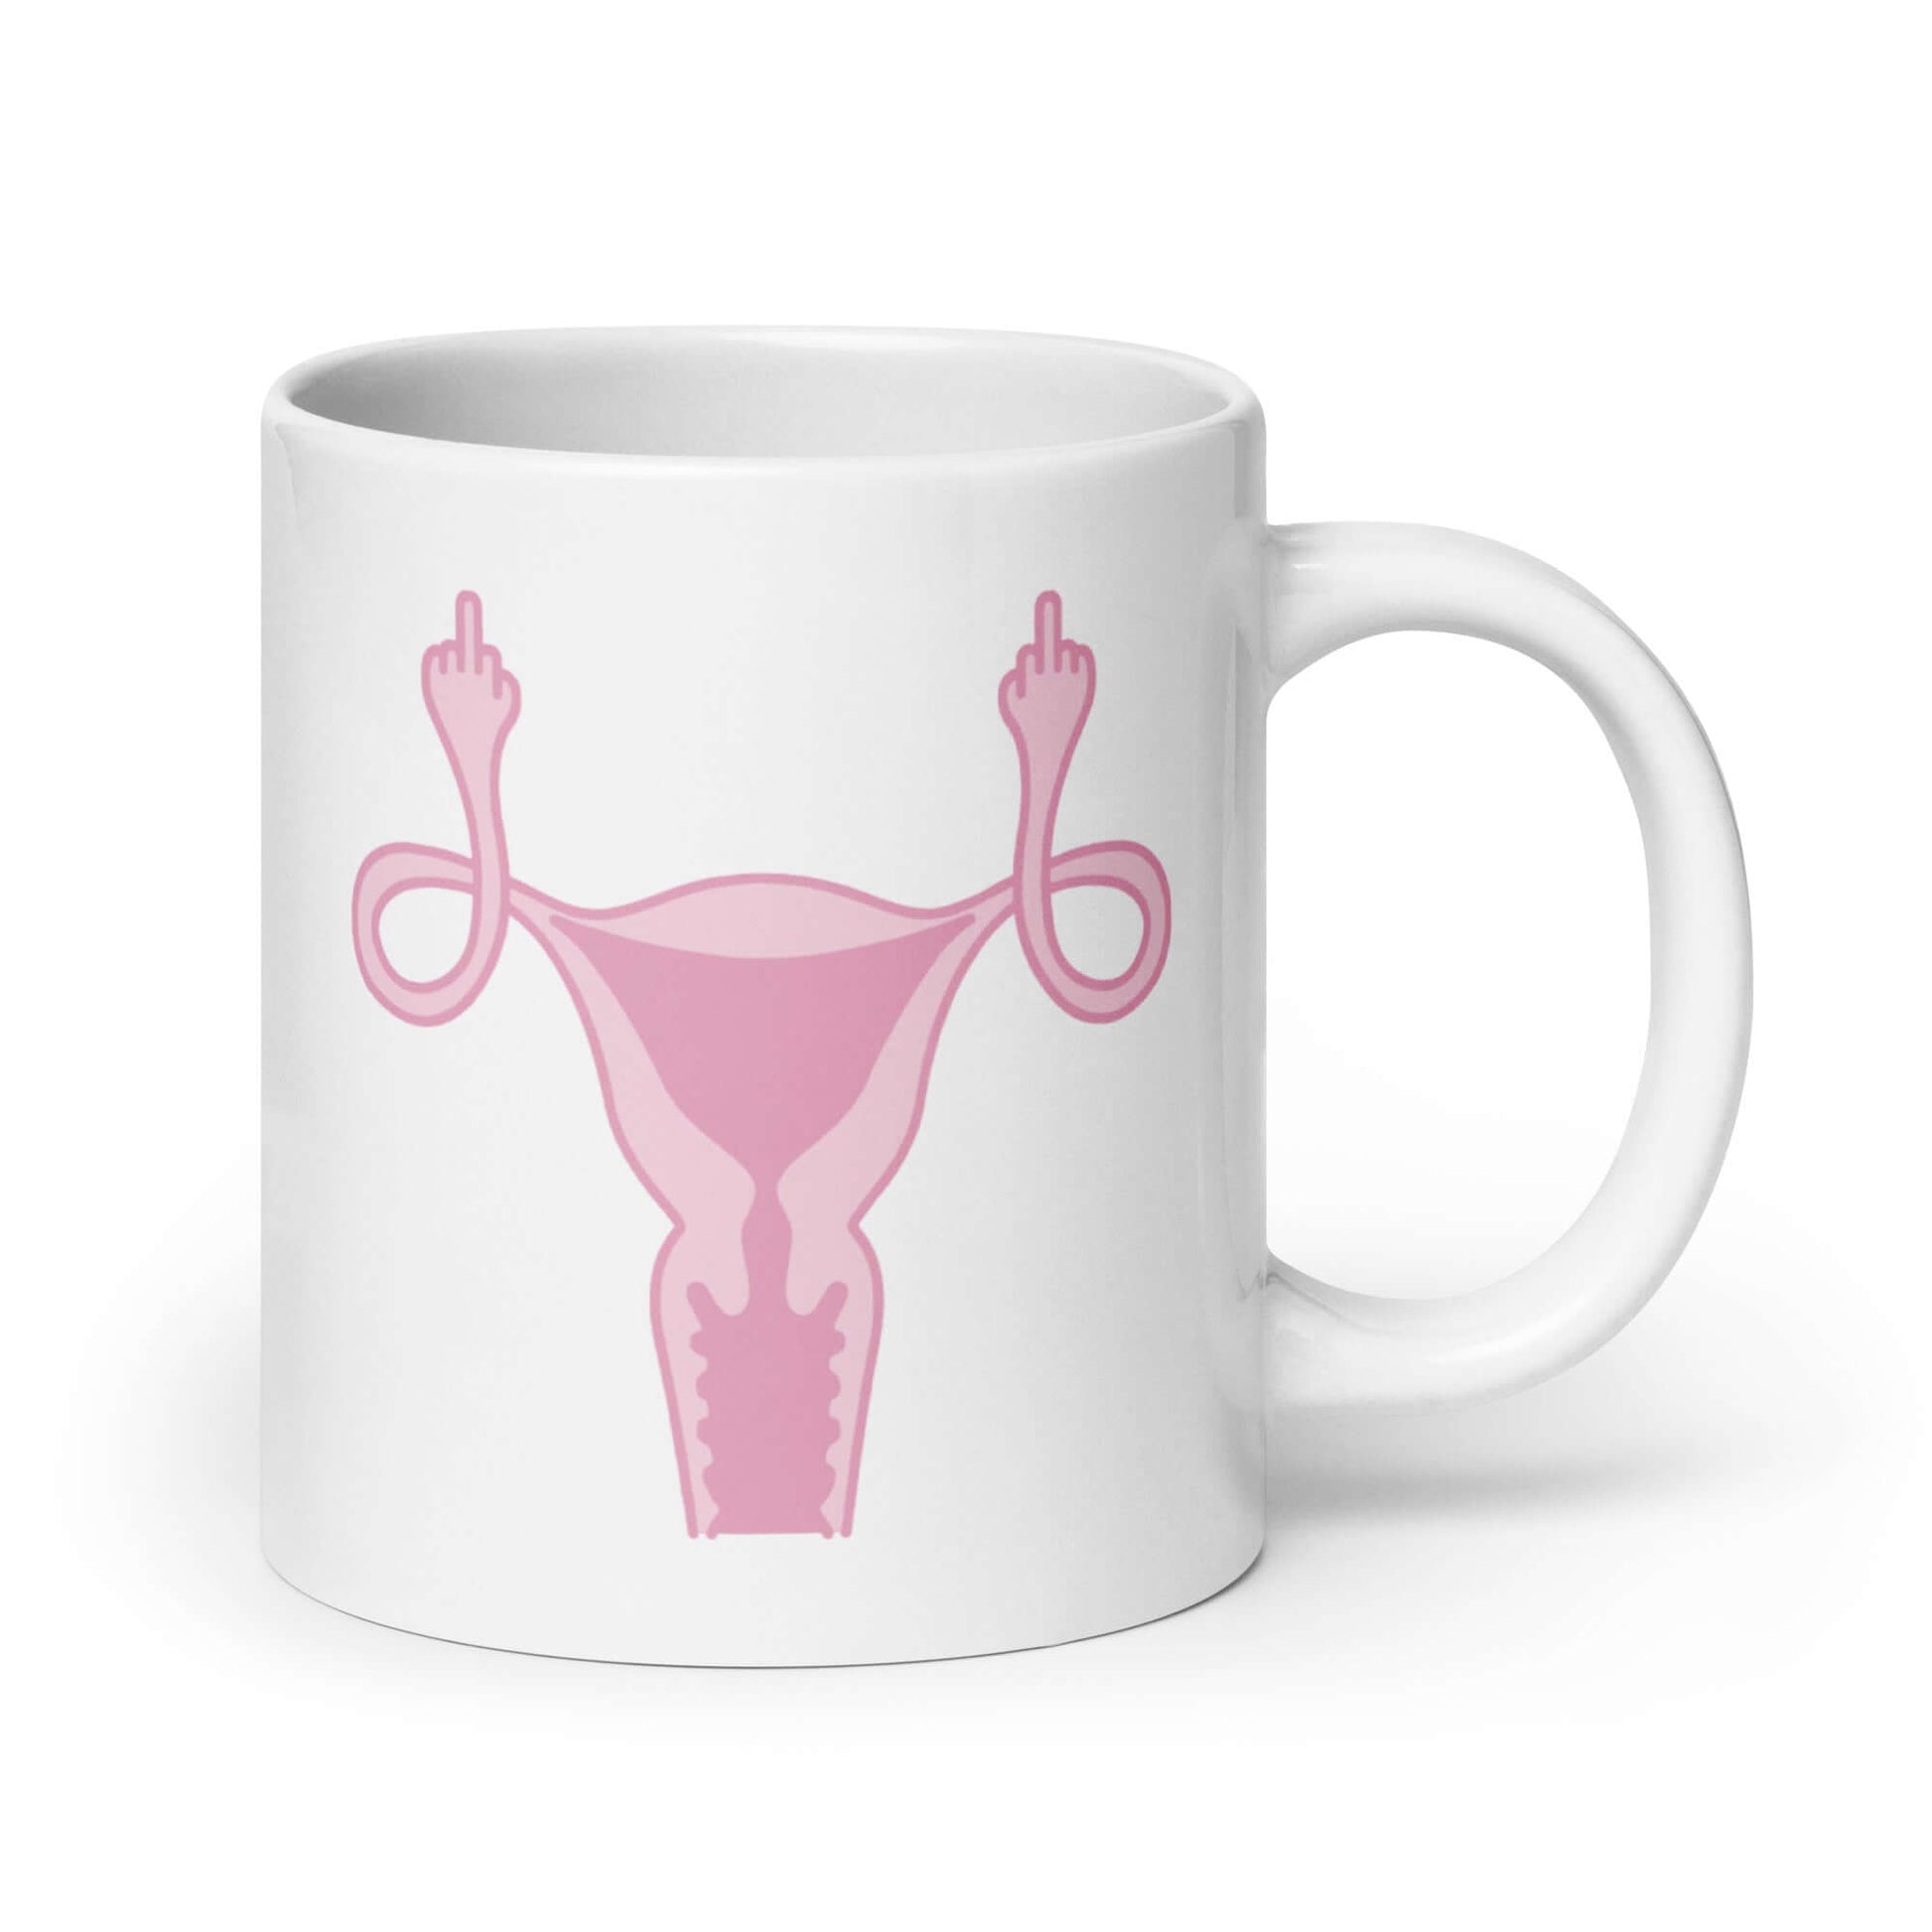 20 ounce coffee mug with pink uterus flipping middle finger graphic printed on it by witticisms r us dot com